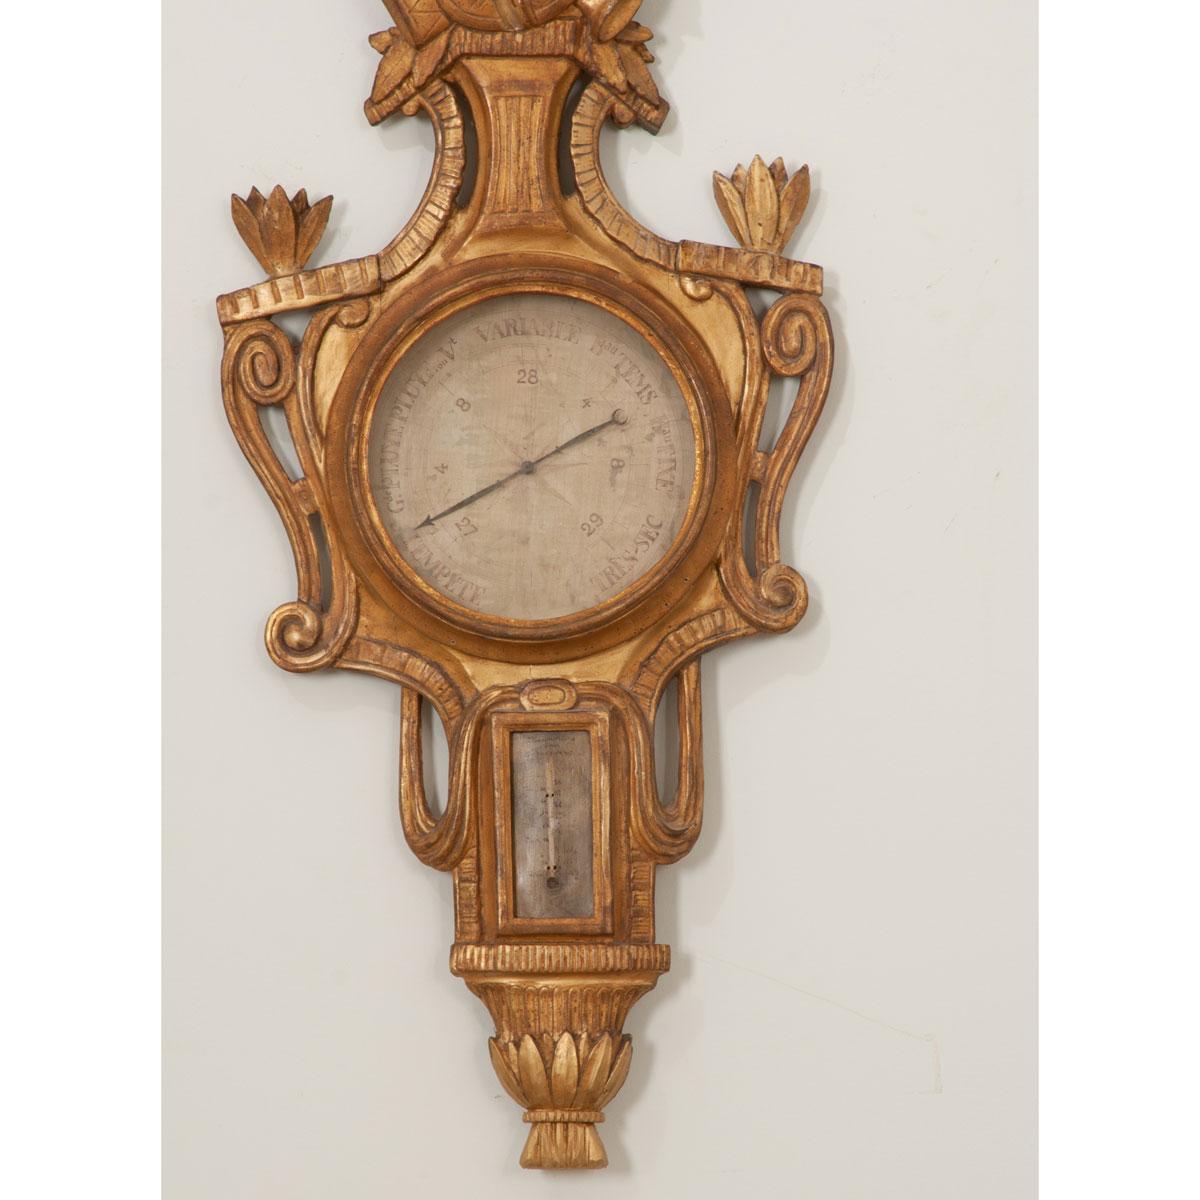 A stunning gold gilt Louis XVI barometer, made in France circa 1780. The instrument was used to measure atmospheric pressure and had a thermometer below the central dial to measure air temperature. Although this barometer has lost its scientific